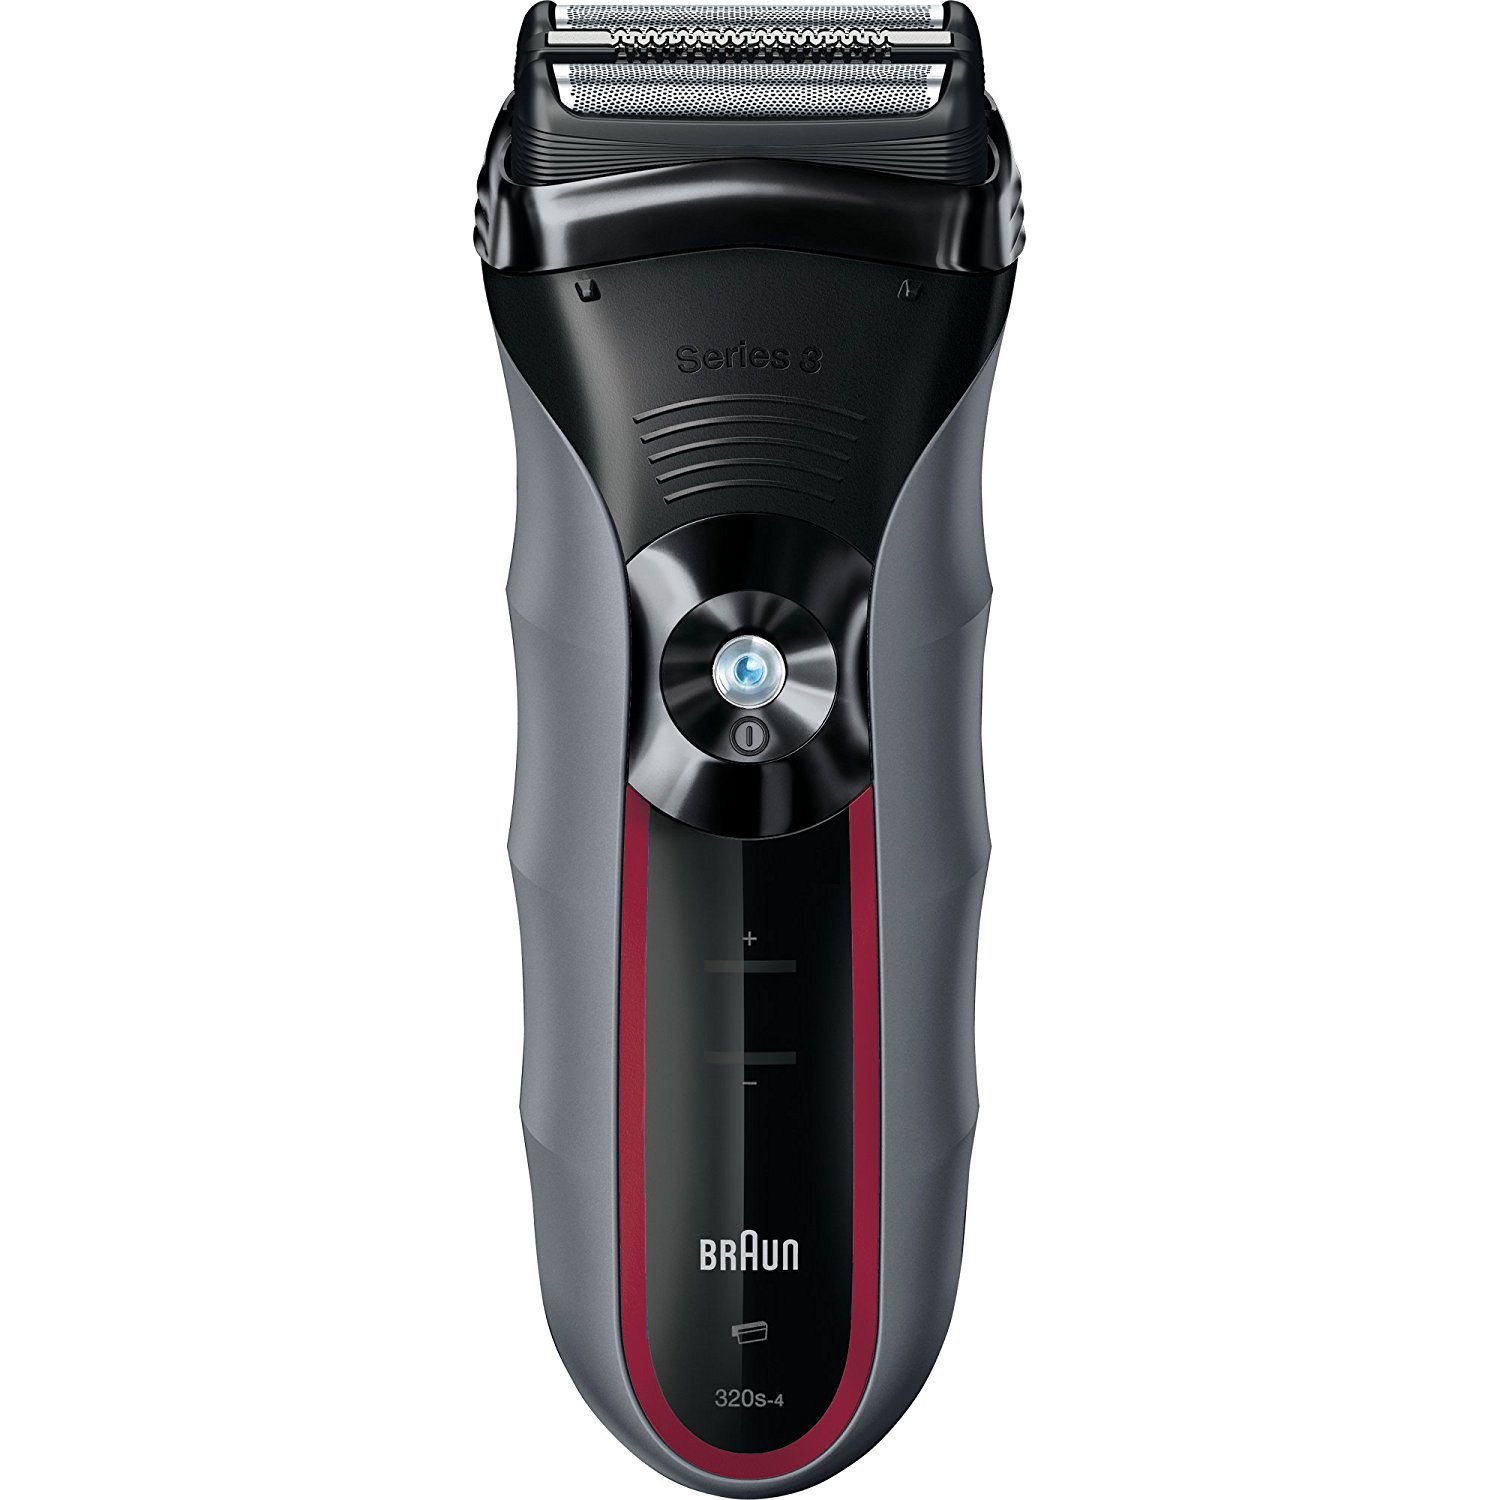 Braun 3 Series 320S-4 Shaver Review